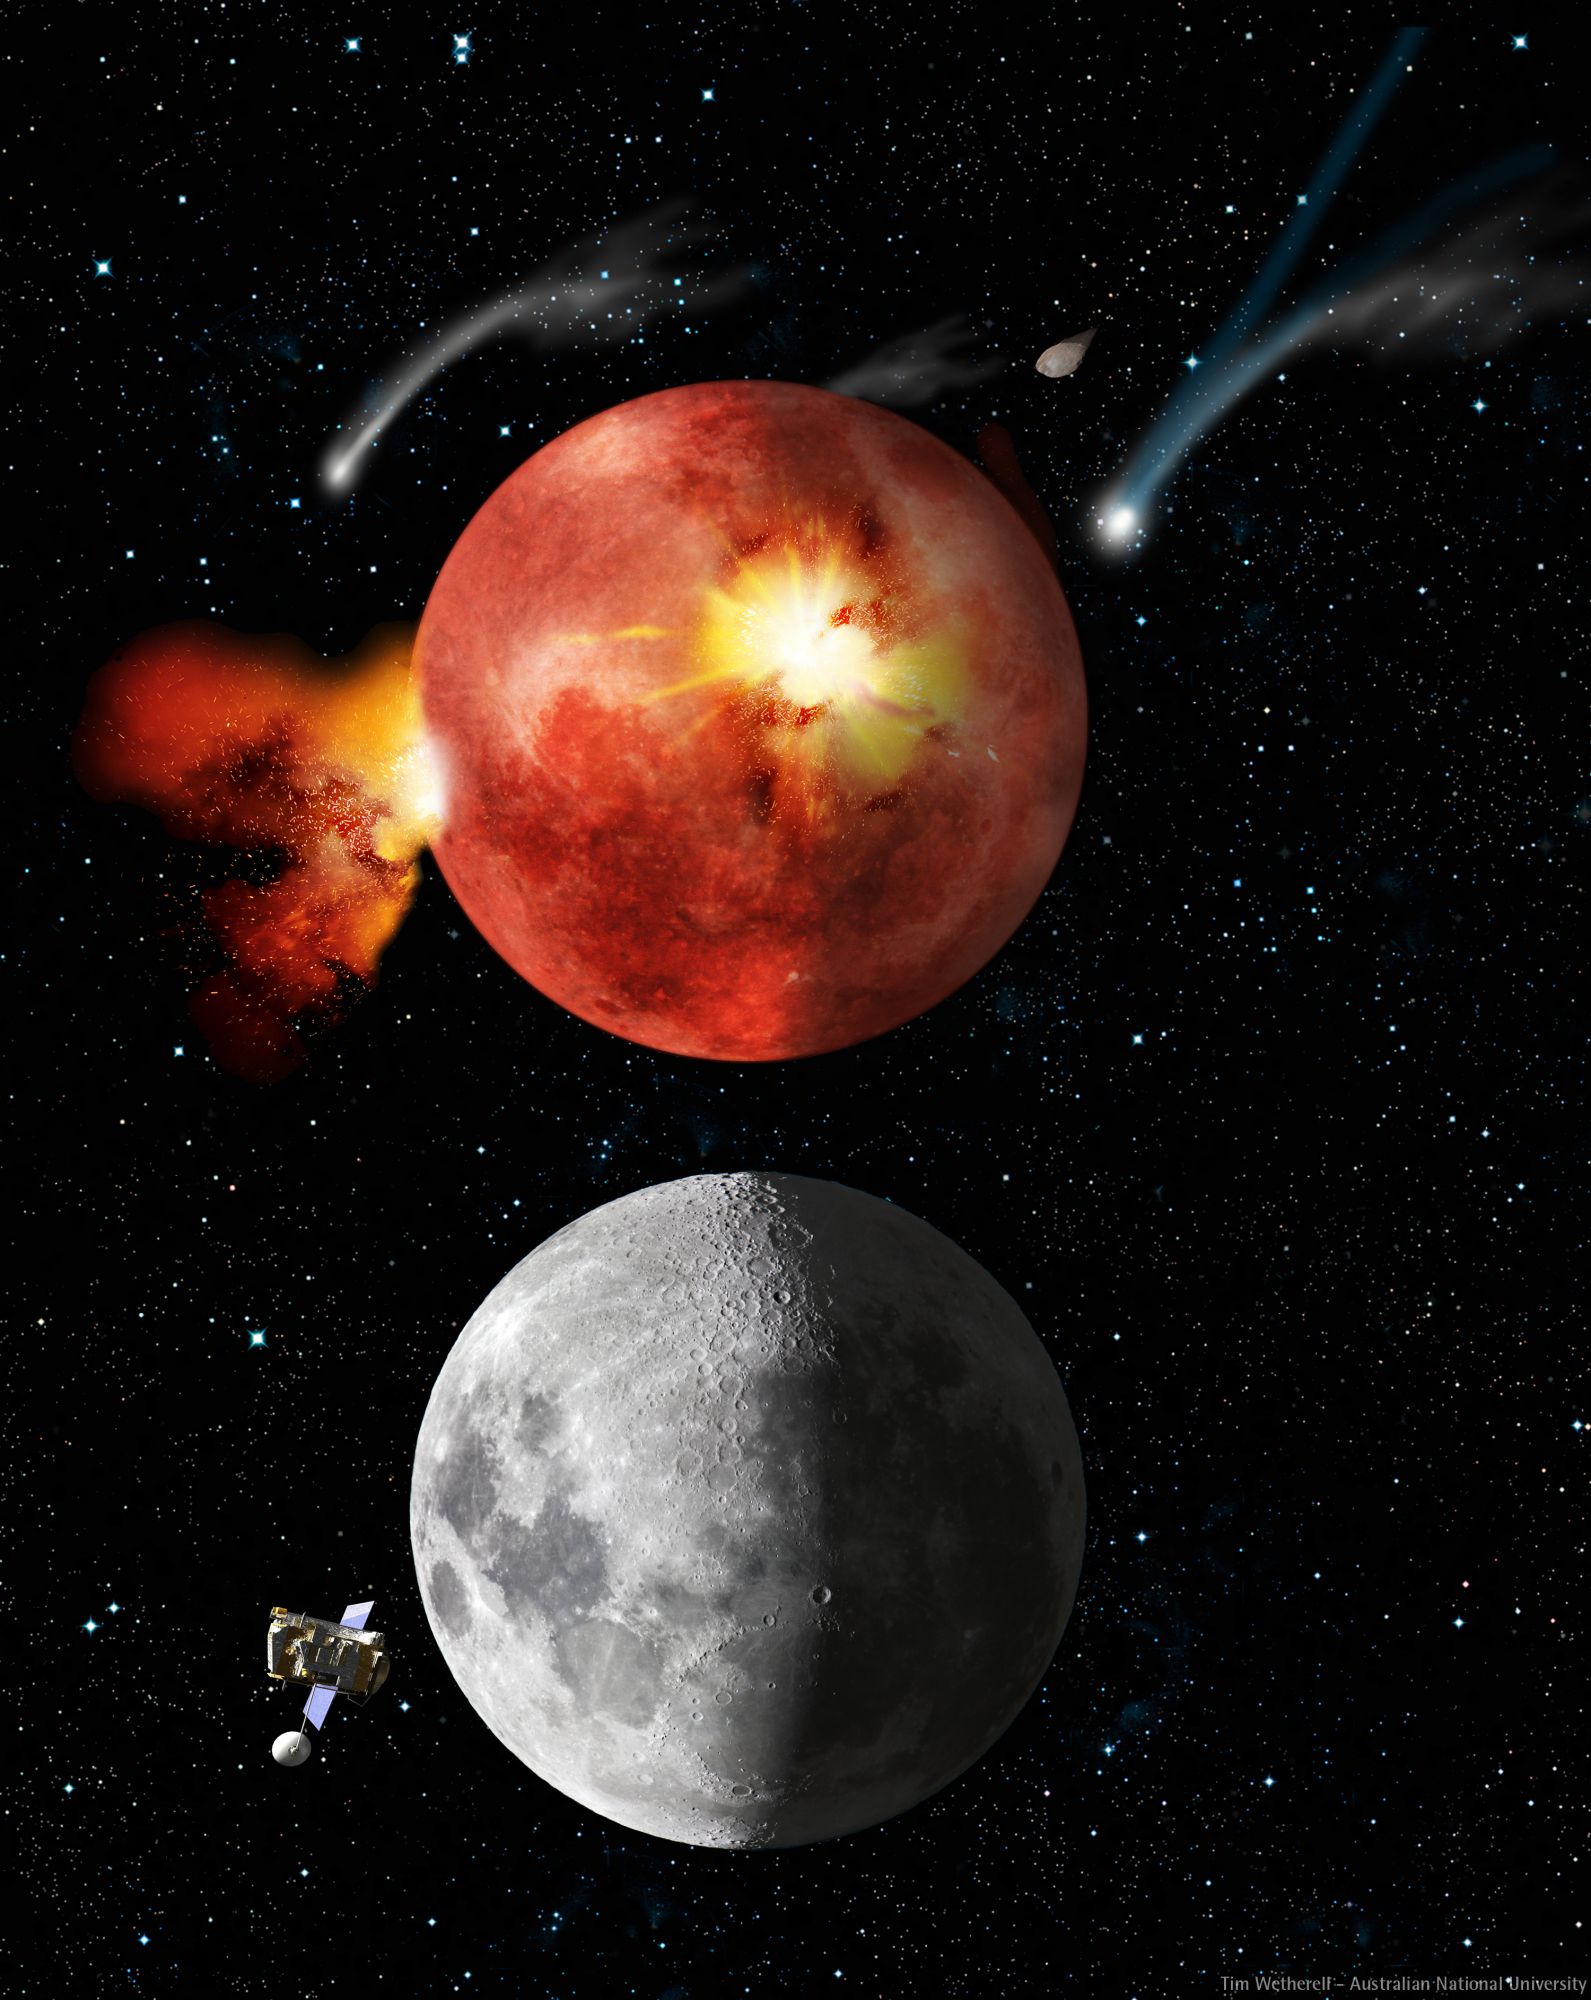 An artist's impression showing the effect of the LHB on the Moon (top), explaining the existence of today's the lunar seas (bottom). © Tim Wetherell - Australian National University